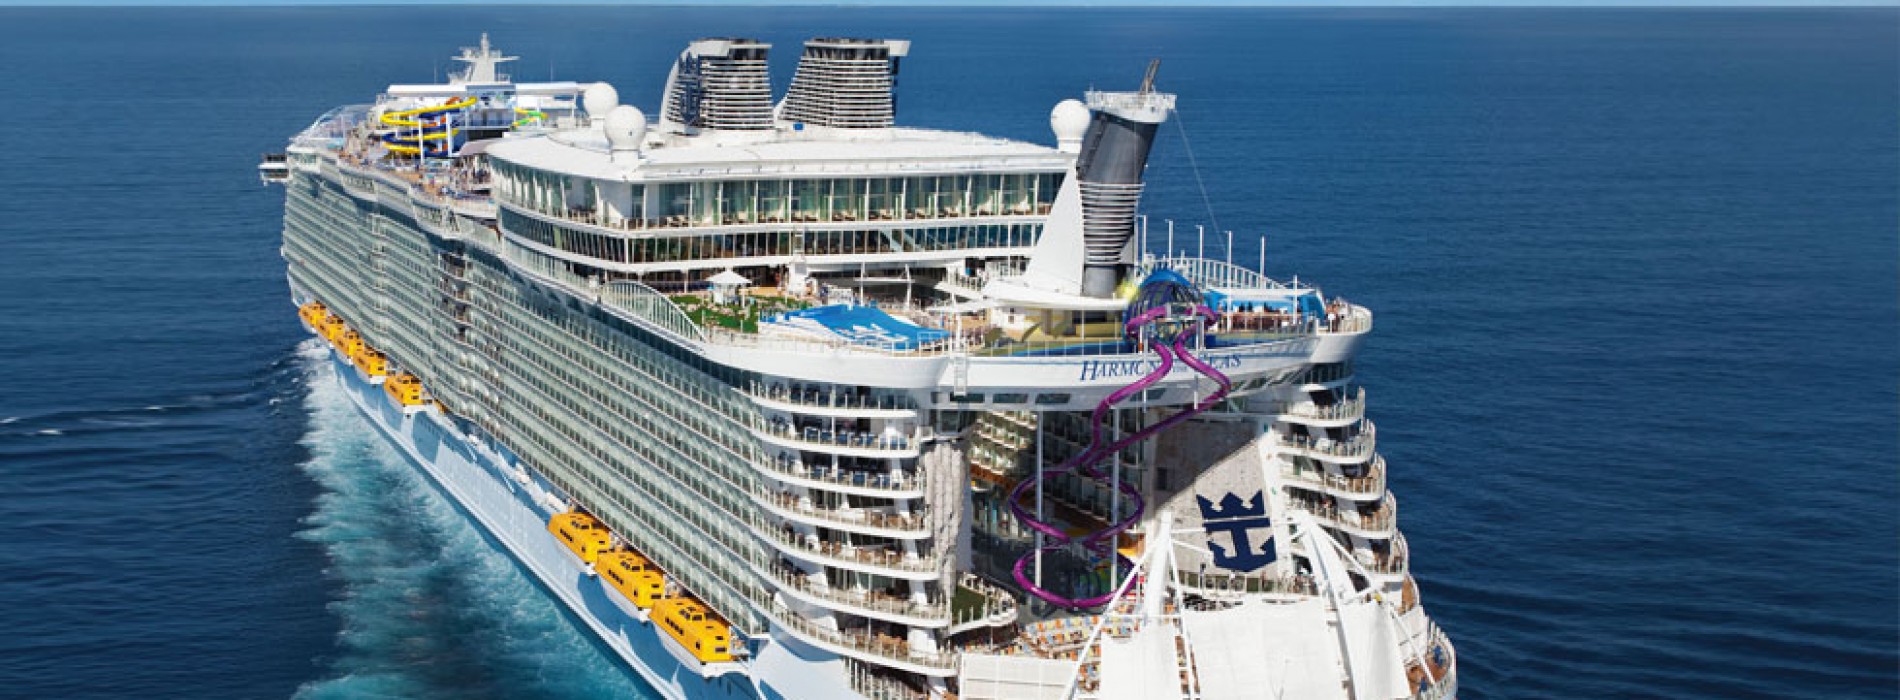 Maiden voyage of Harmony of the Seas, the world’s largest cruise ship